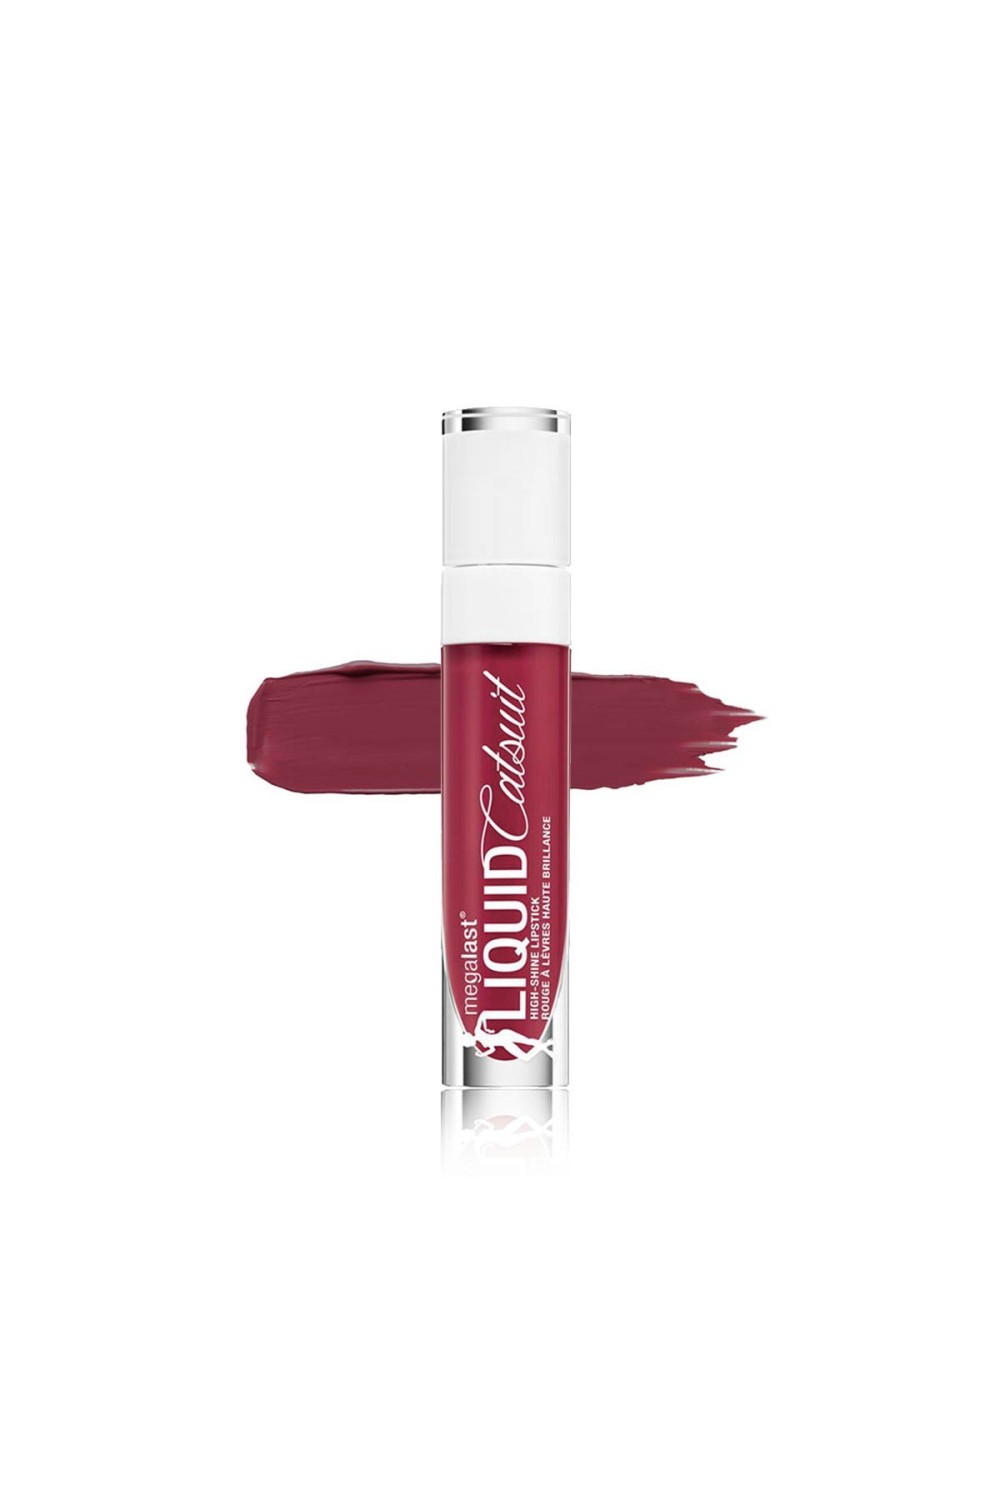 Wet N Wild Megalast Liquid Catsuit High Shine Lipstick E969A Wine Is The Answer